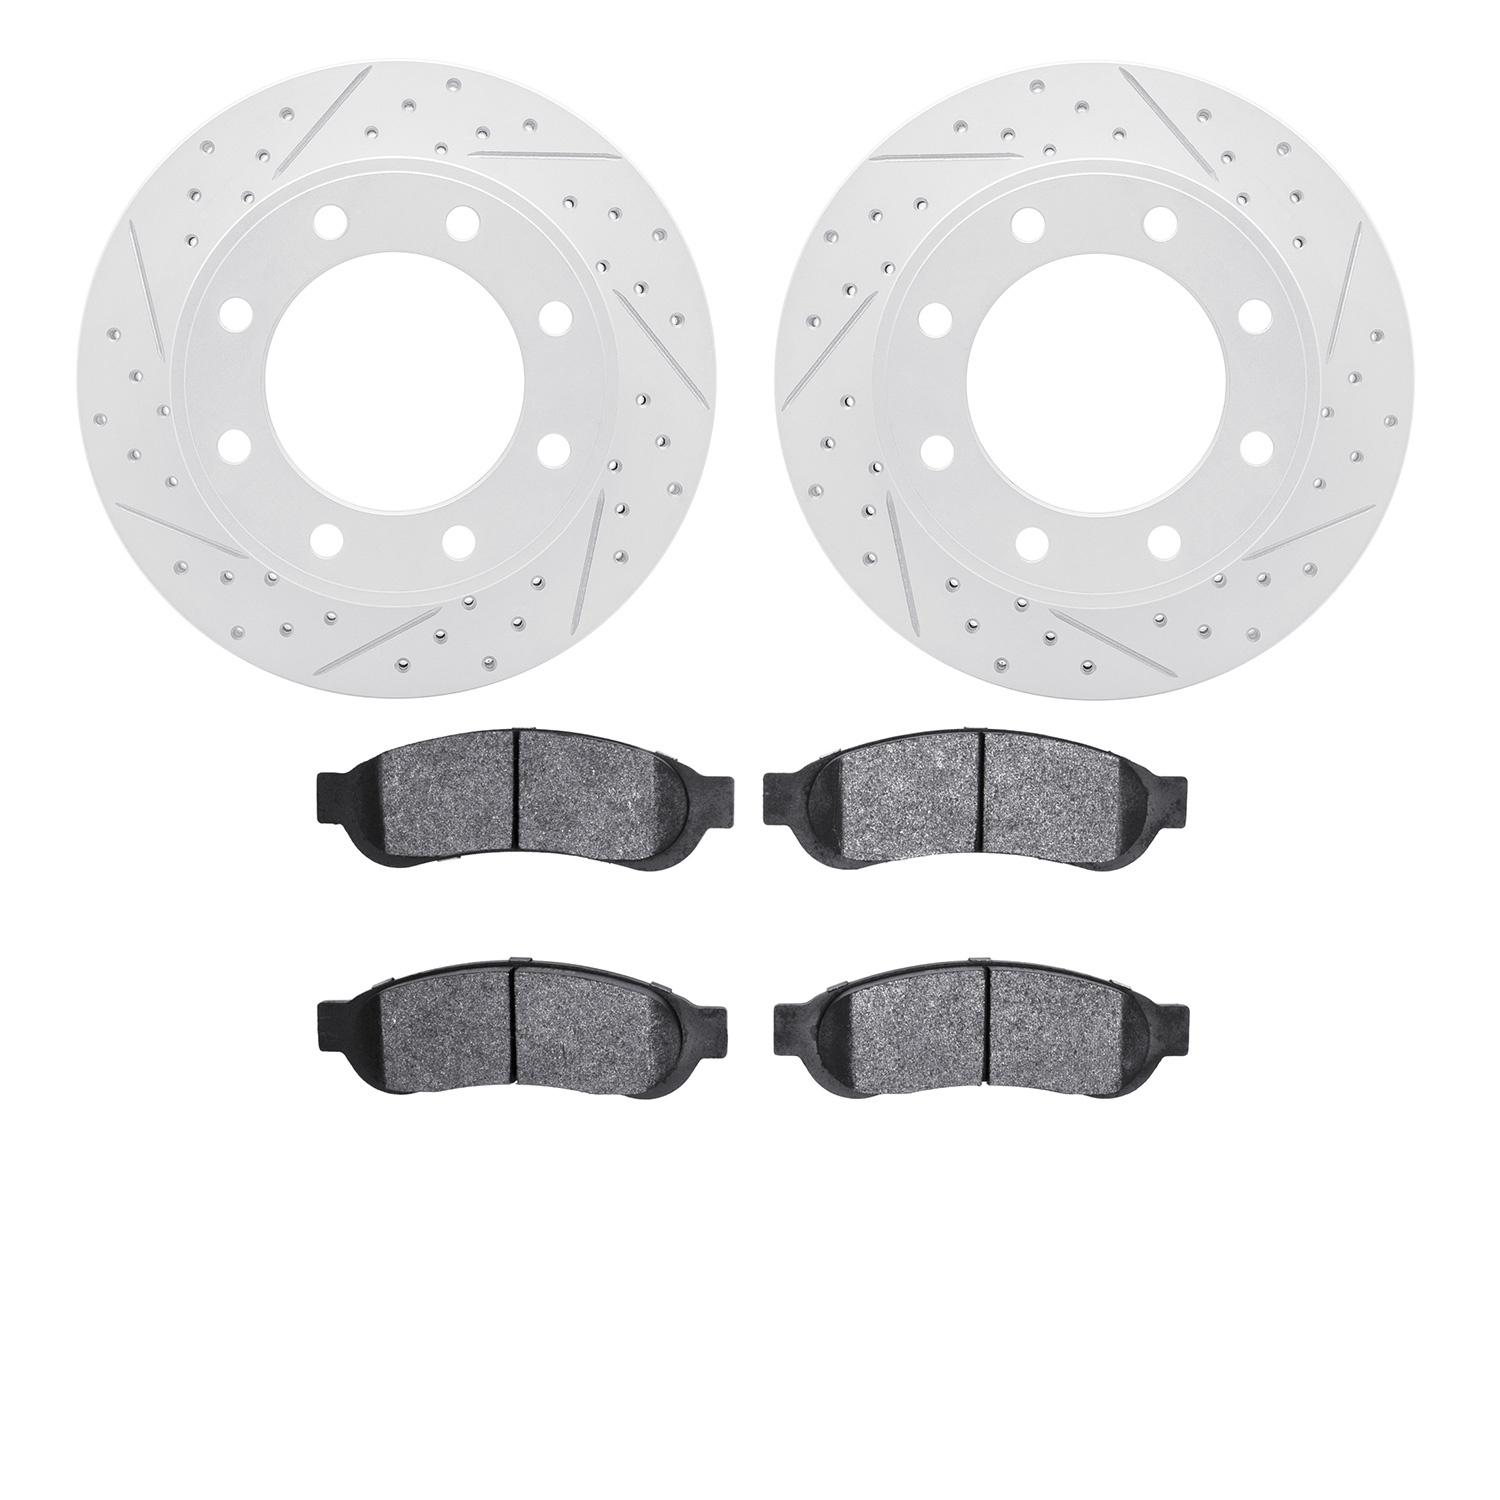 2402-54055 Geoperformance Drilled/Slotted Brake Rotors with Ultimate-Duty Brake Pads Kit, 2006-2010 Ford/Lincoln/Mercury/Mazda,